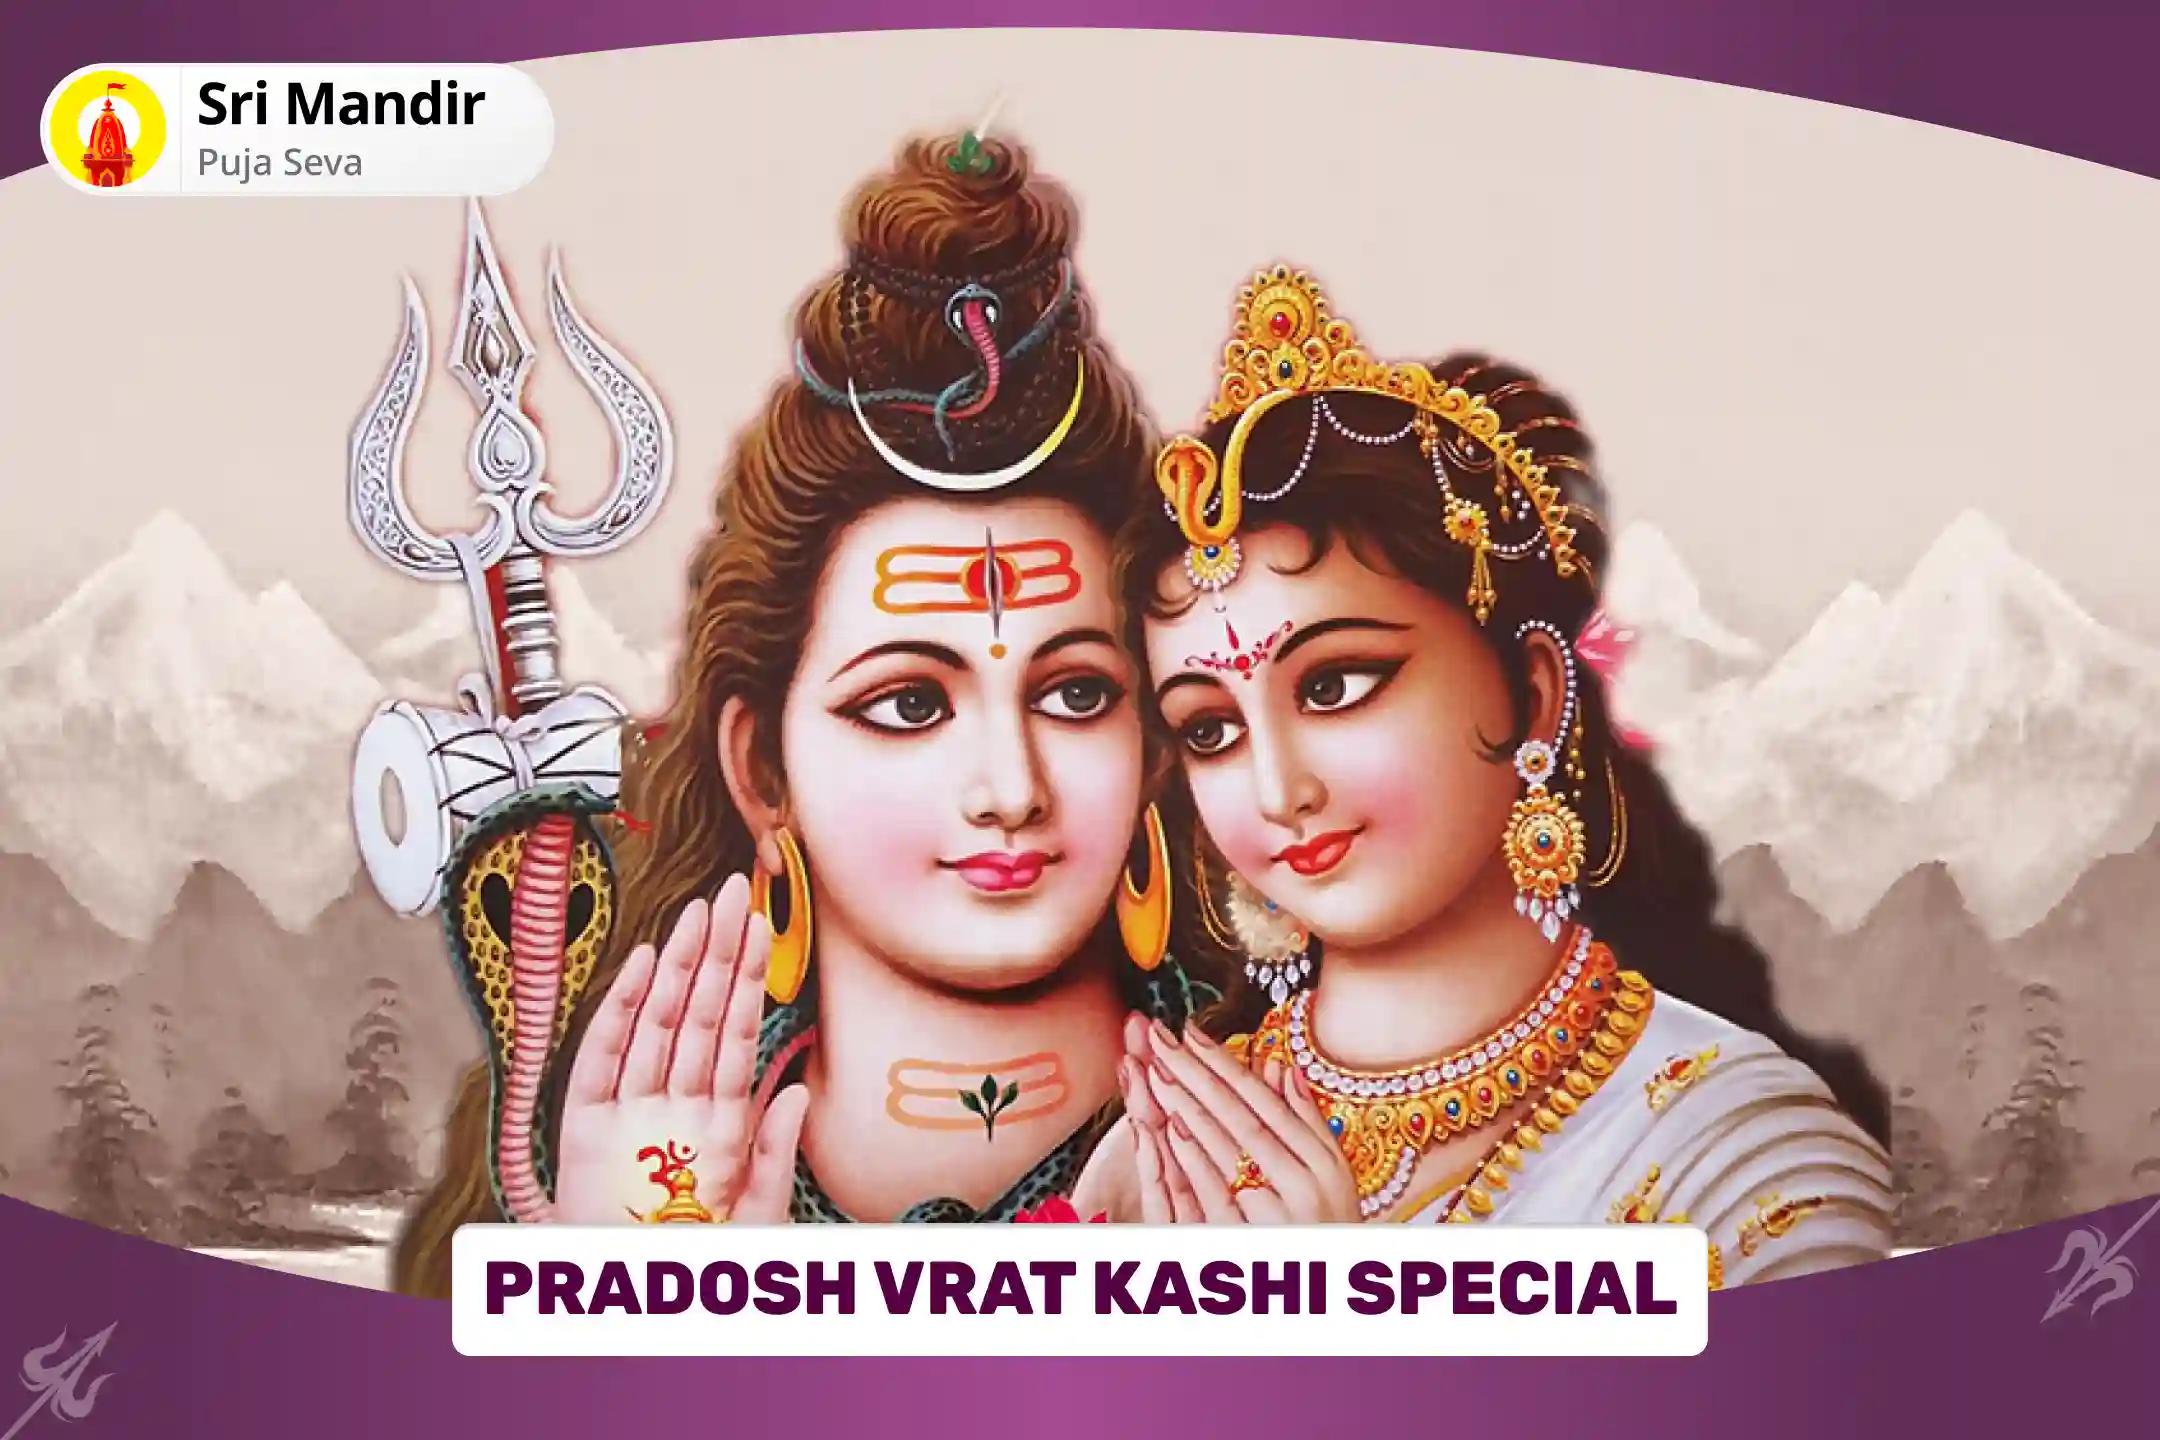 Pradosh Vrat Kashi Special Gauri-Shankar Puja and Shiv-Gauri Stotra Path To Resolve Conflicts and Achieve Bliss in Relationship